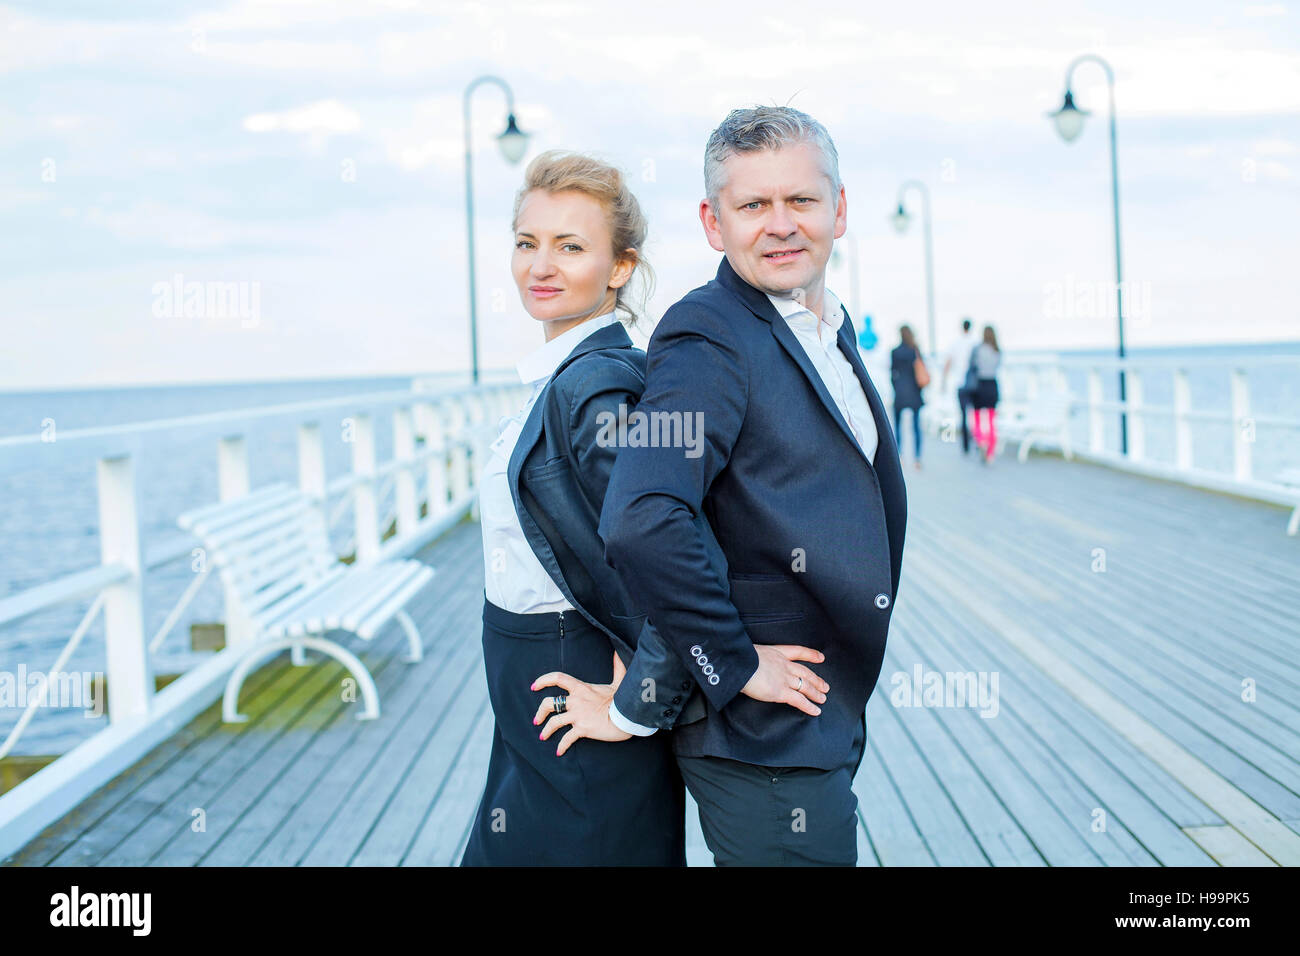 Two business people on jetty with hands on hips Stock Photo